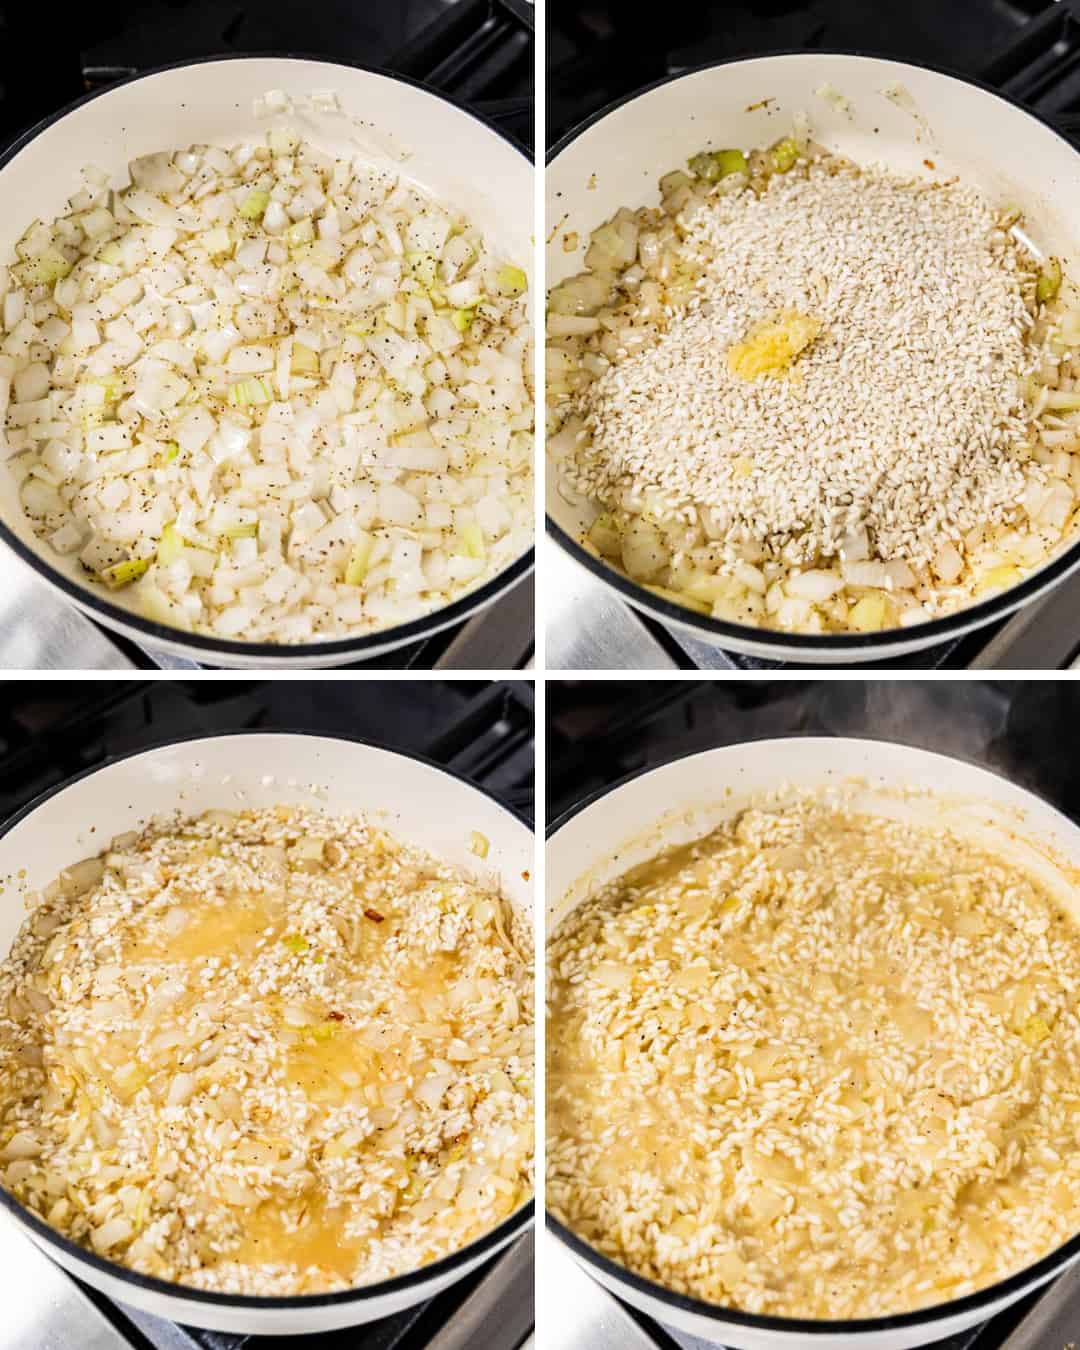 A collage image showing four different stages of making risotto.